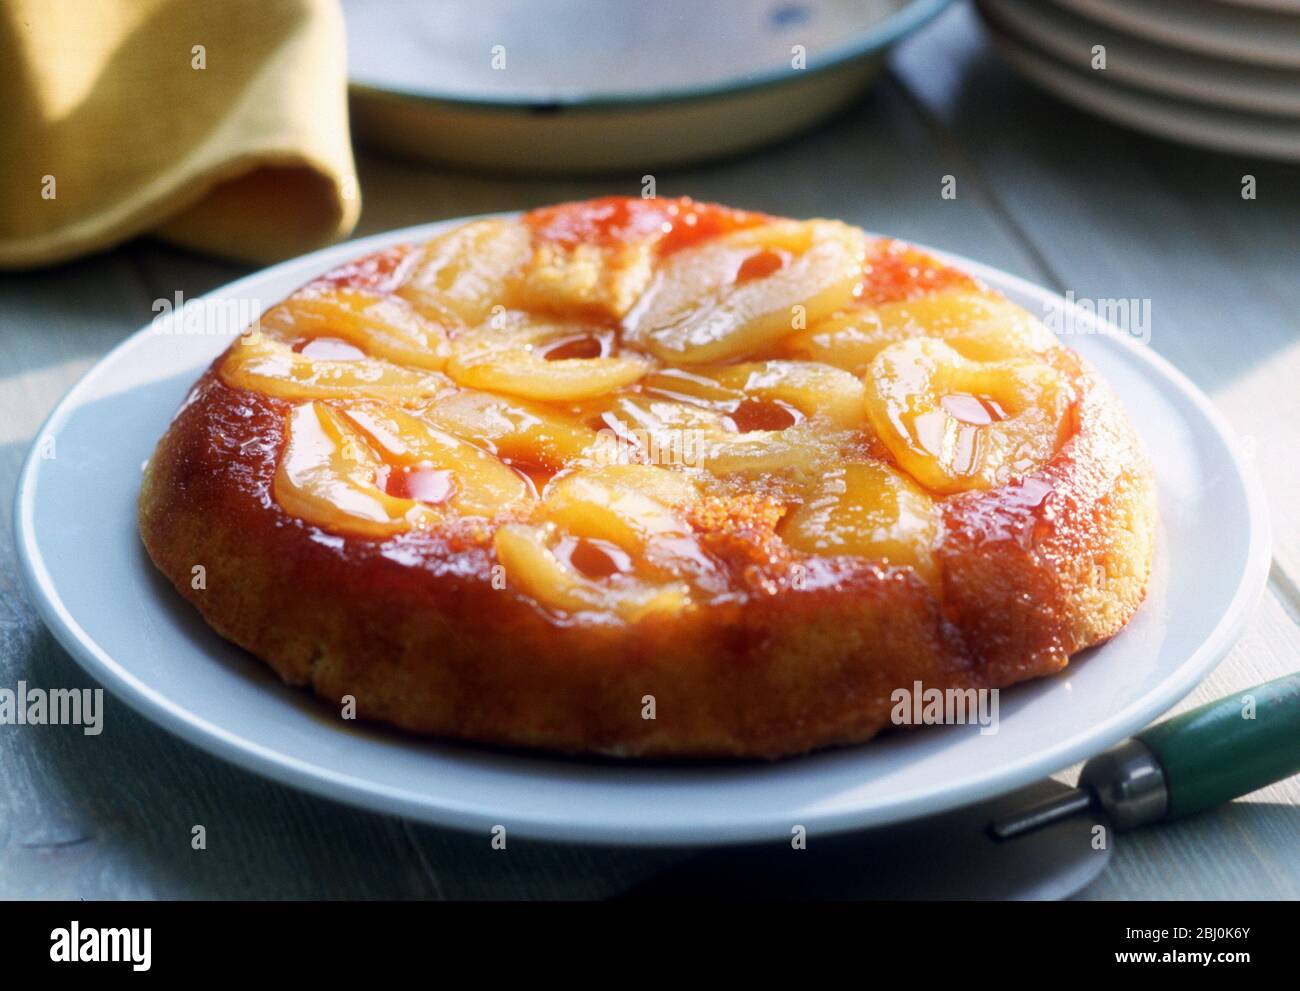 Upside down cake with pears and cherries - Stock Photo